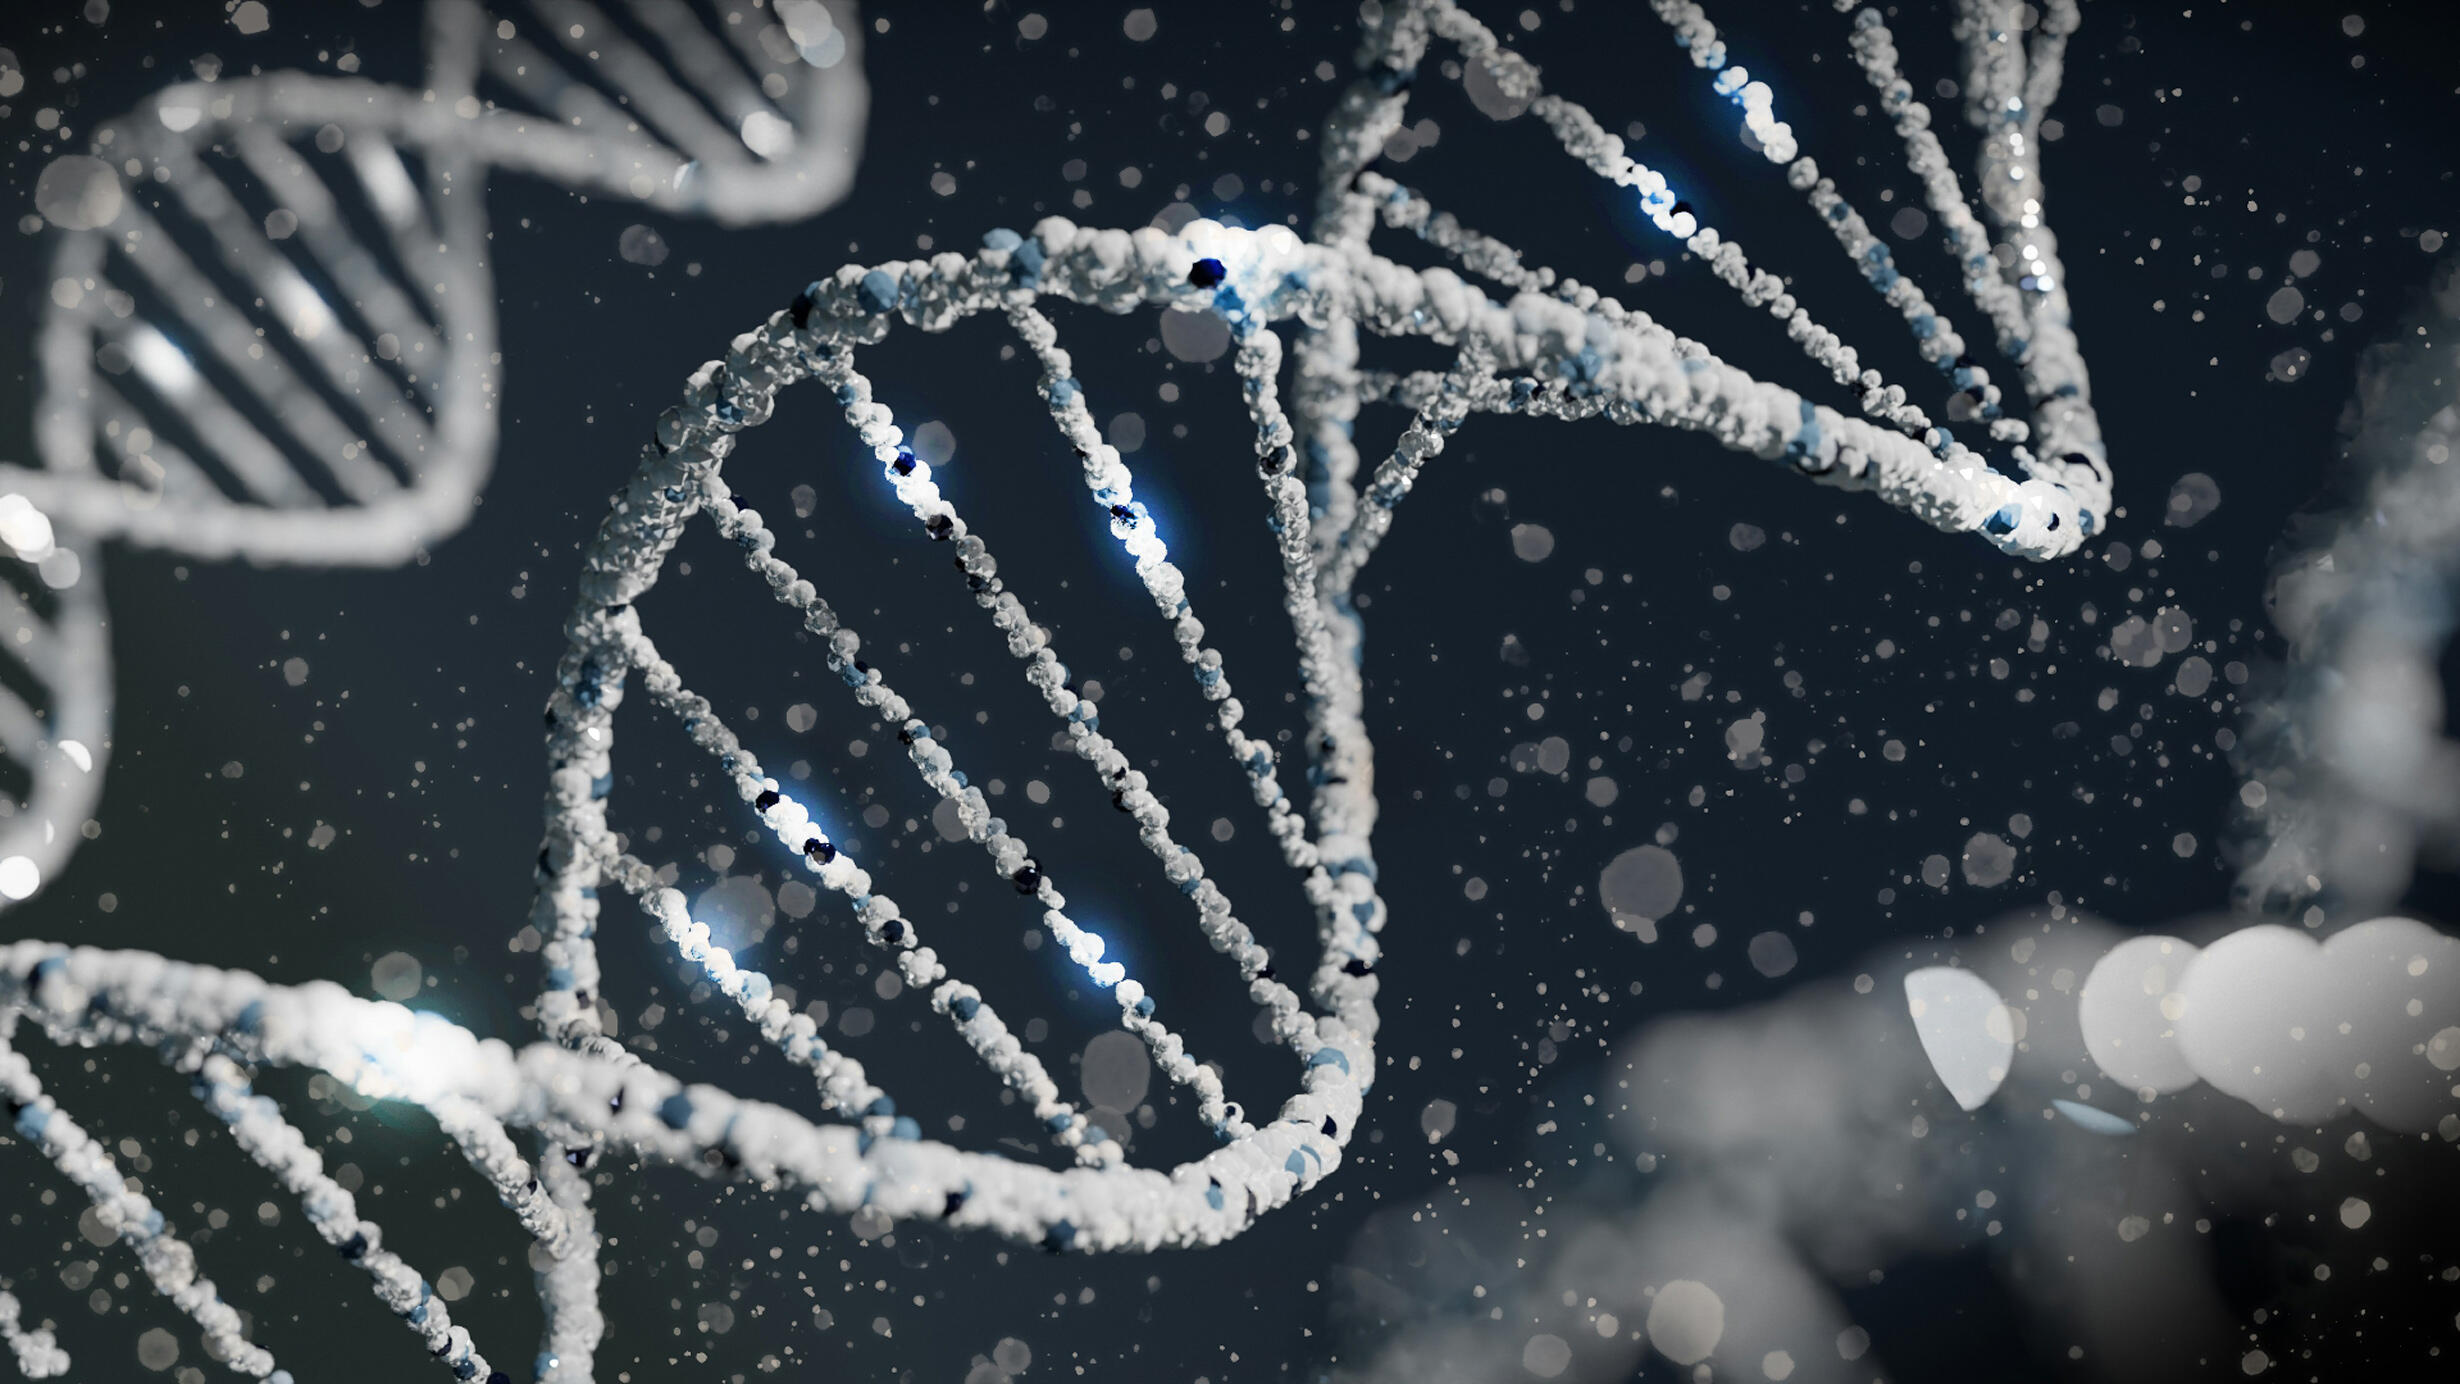 A digital depiction of a DNA helix, rendered in clear bright blue and grey tones.